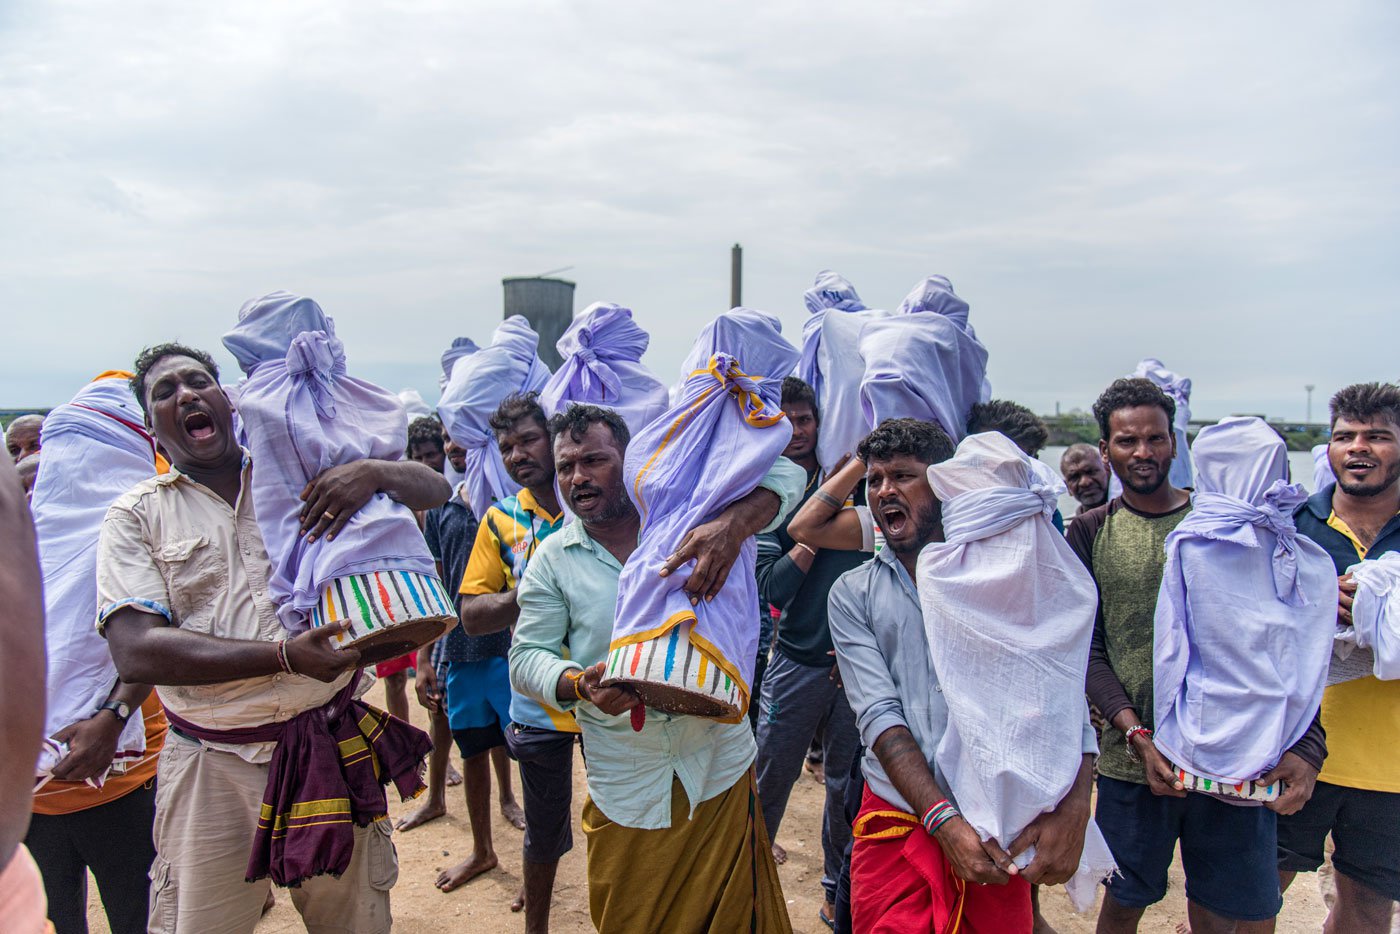 Fishermen shouting slogans as they carry the idols from the boats to their homes